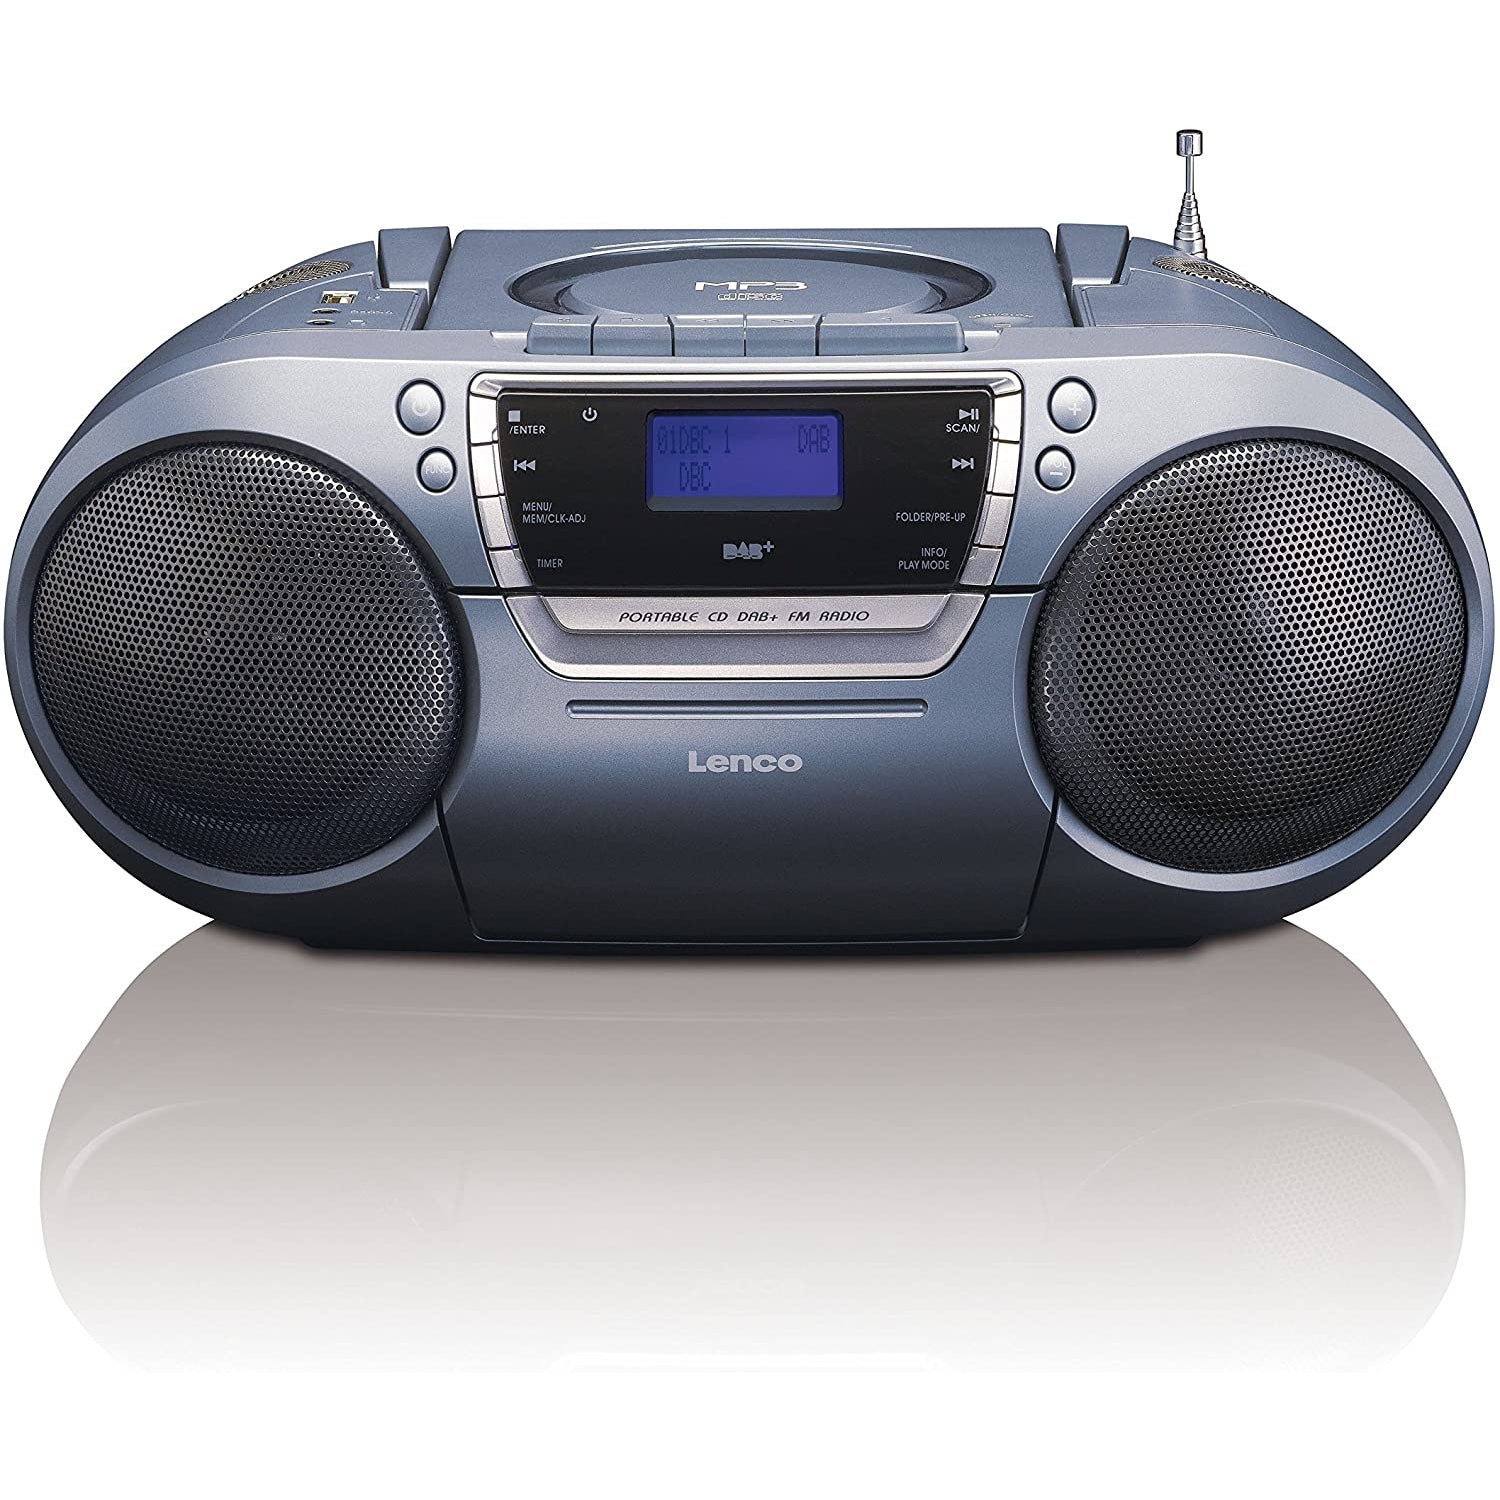 Lenco SCD-680 Silver, Portable Stereo DAB+ & FM Radio with CD, Cassette and USB Player, Grey Boombox